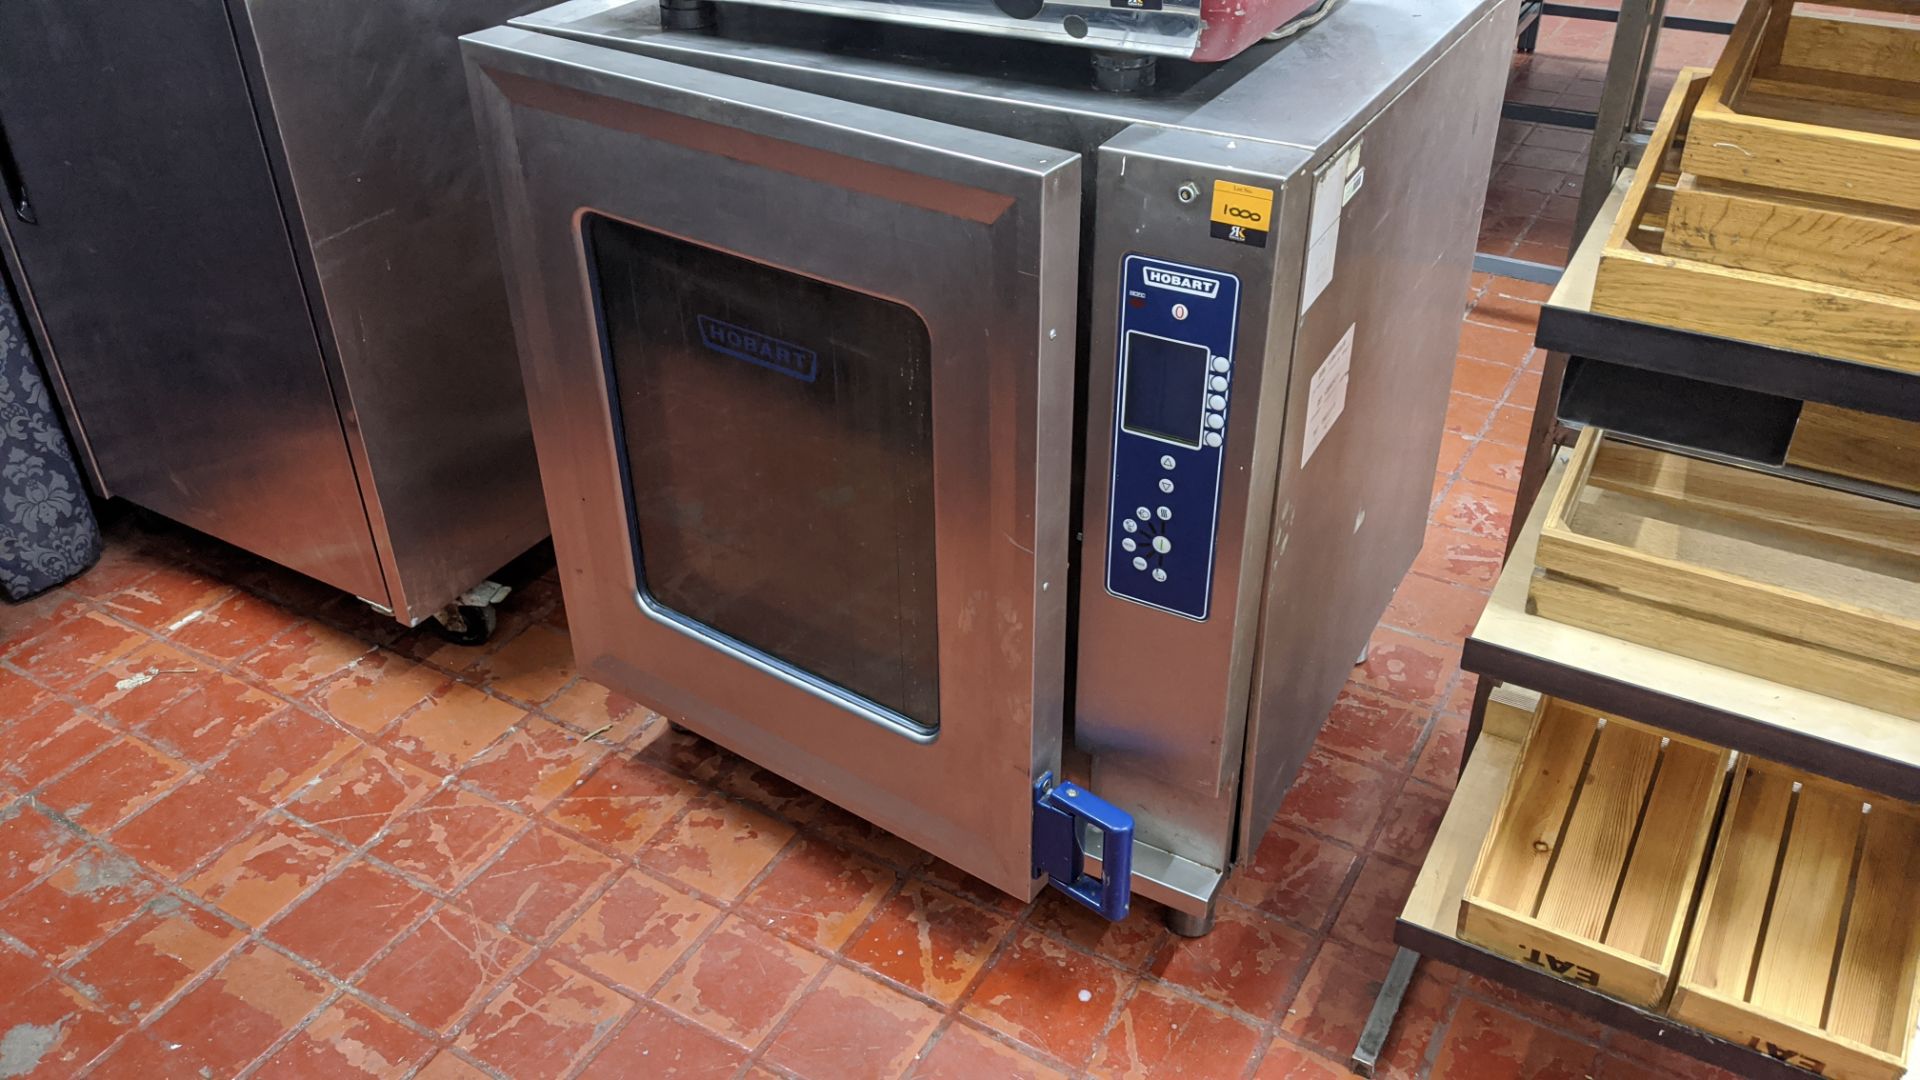 Hobart commercial multifunction steam oven. IMPORTANT: Please remember goods successfully bid upon